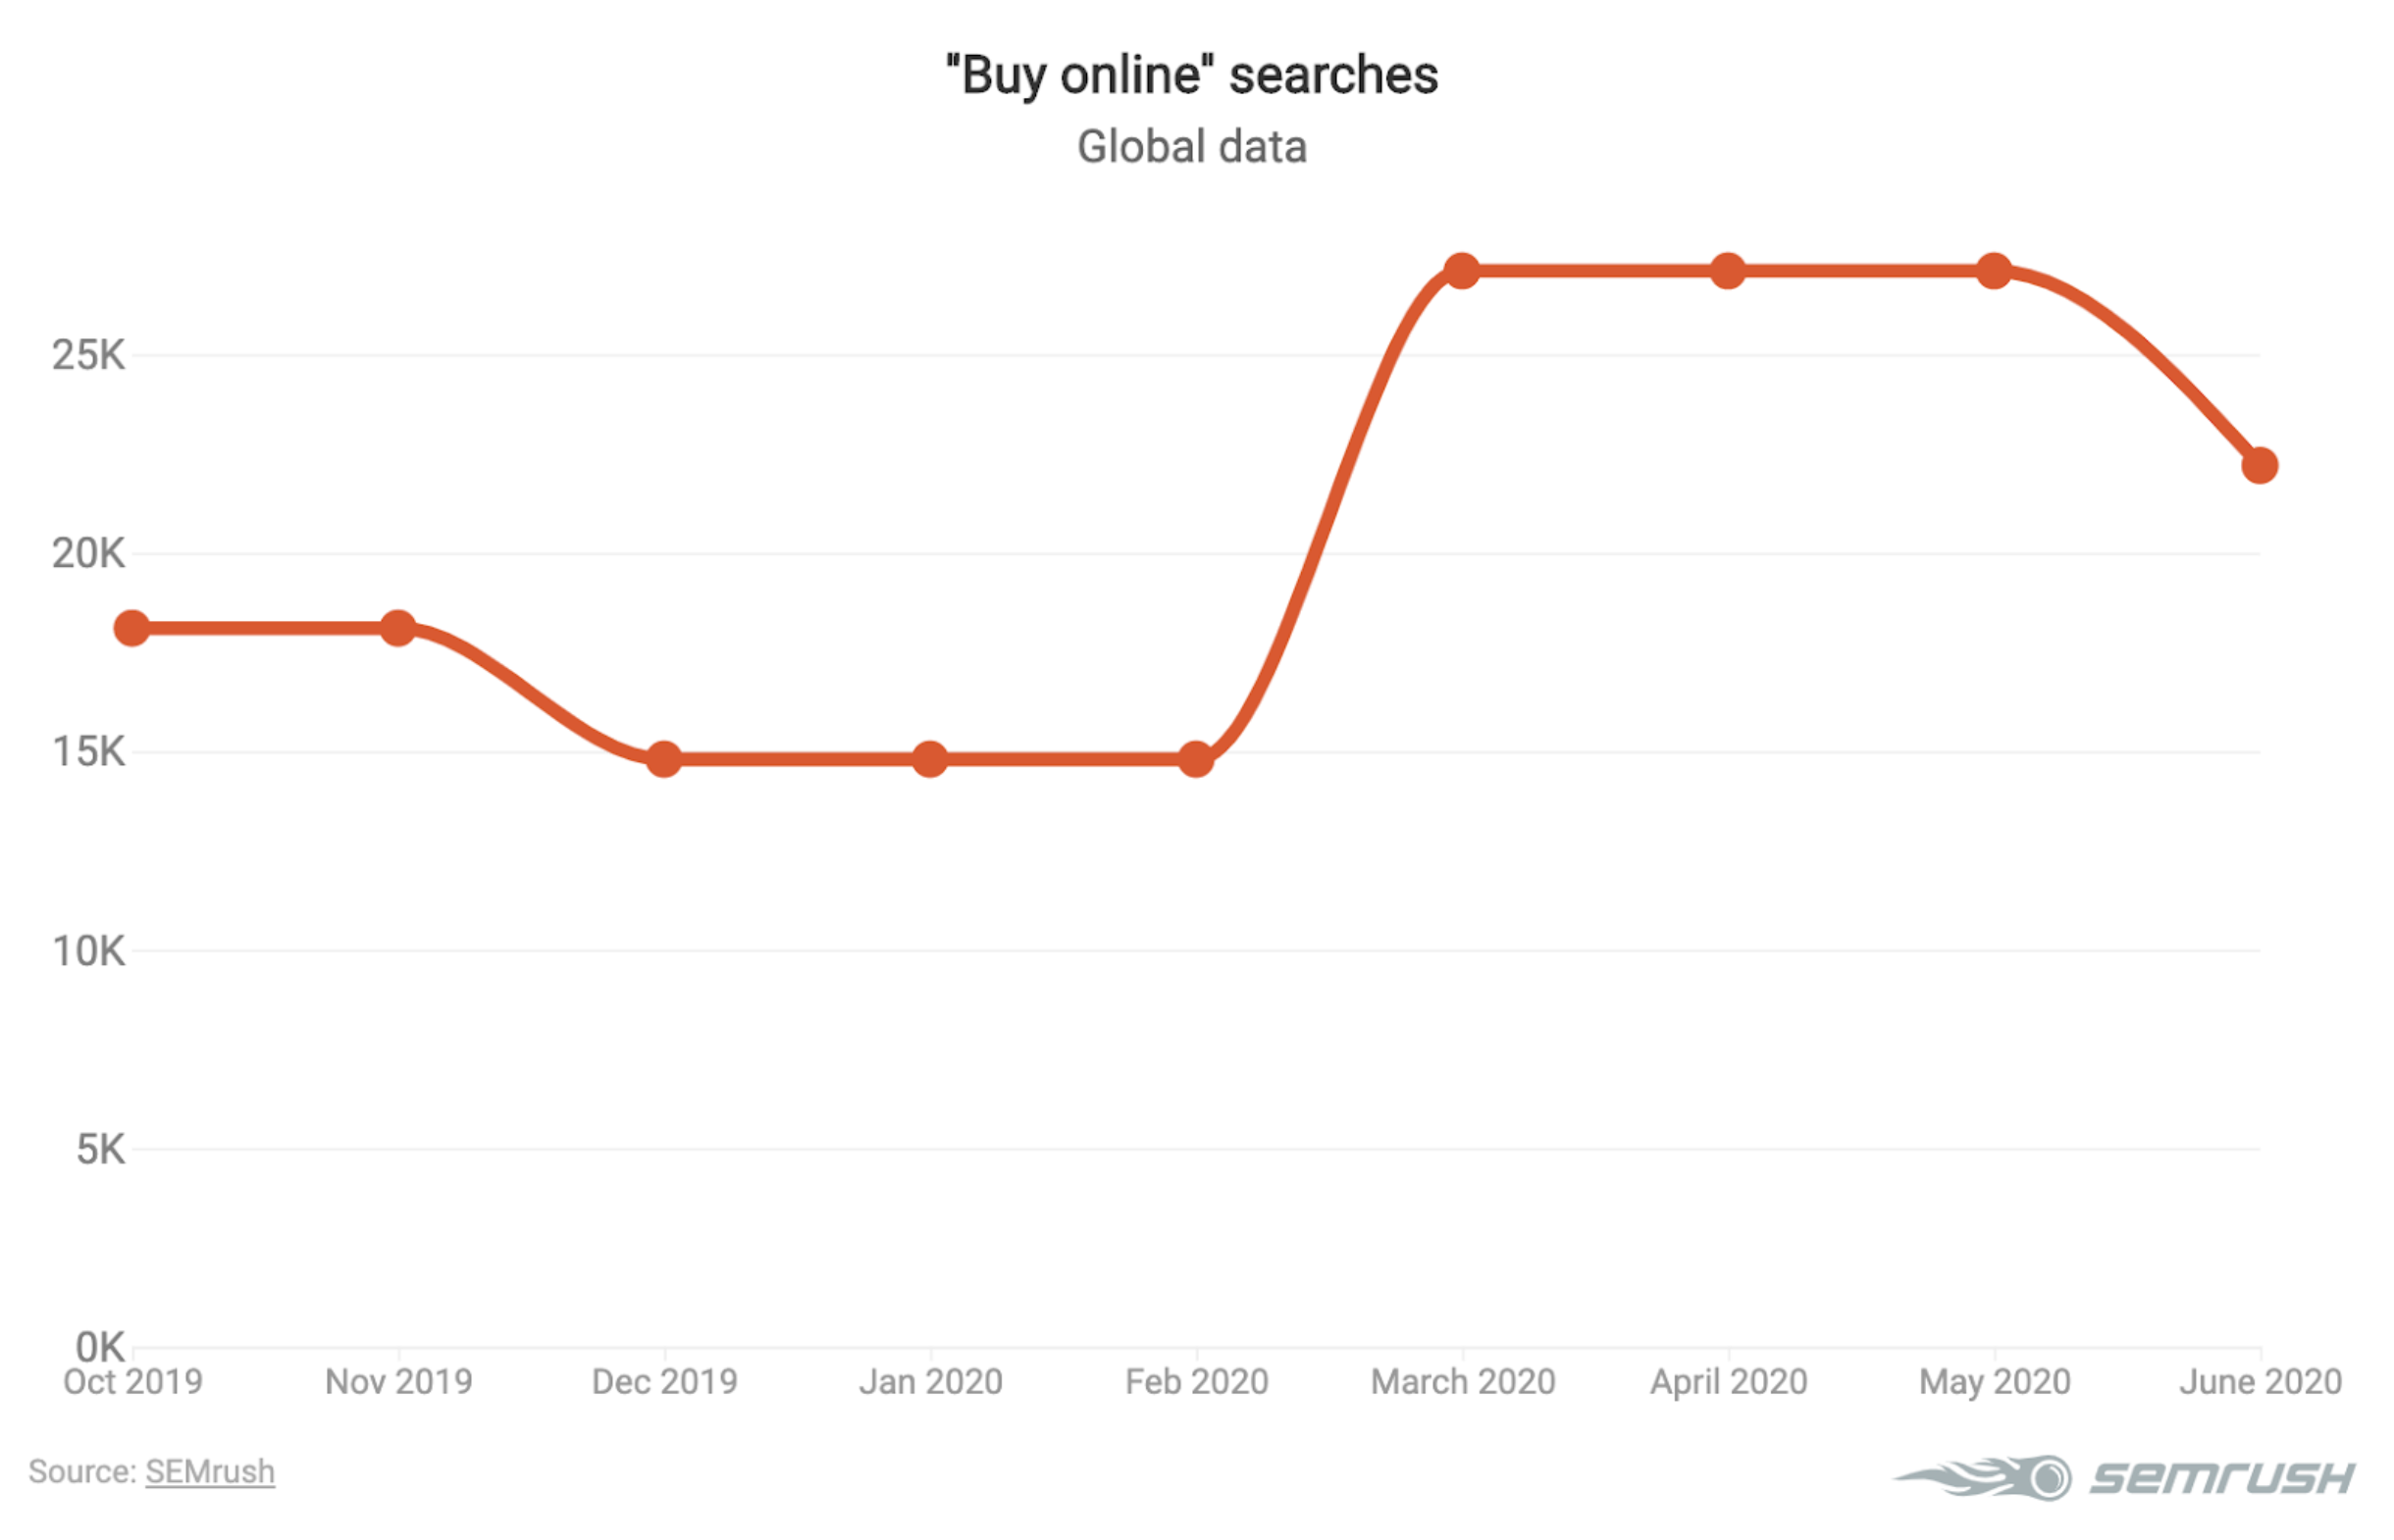 Buy online keyword searches for June 2020 chart